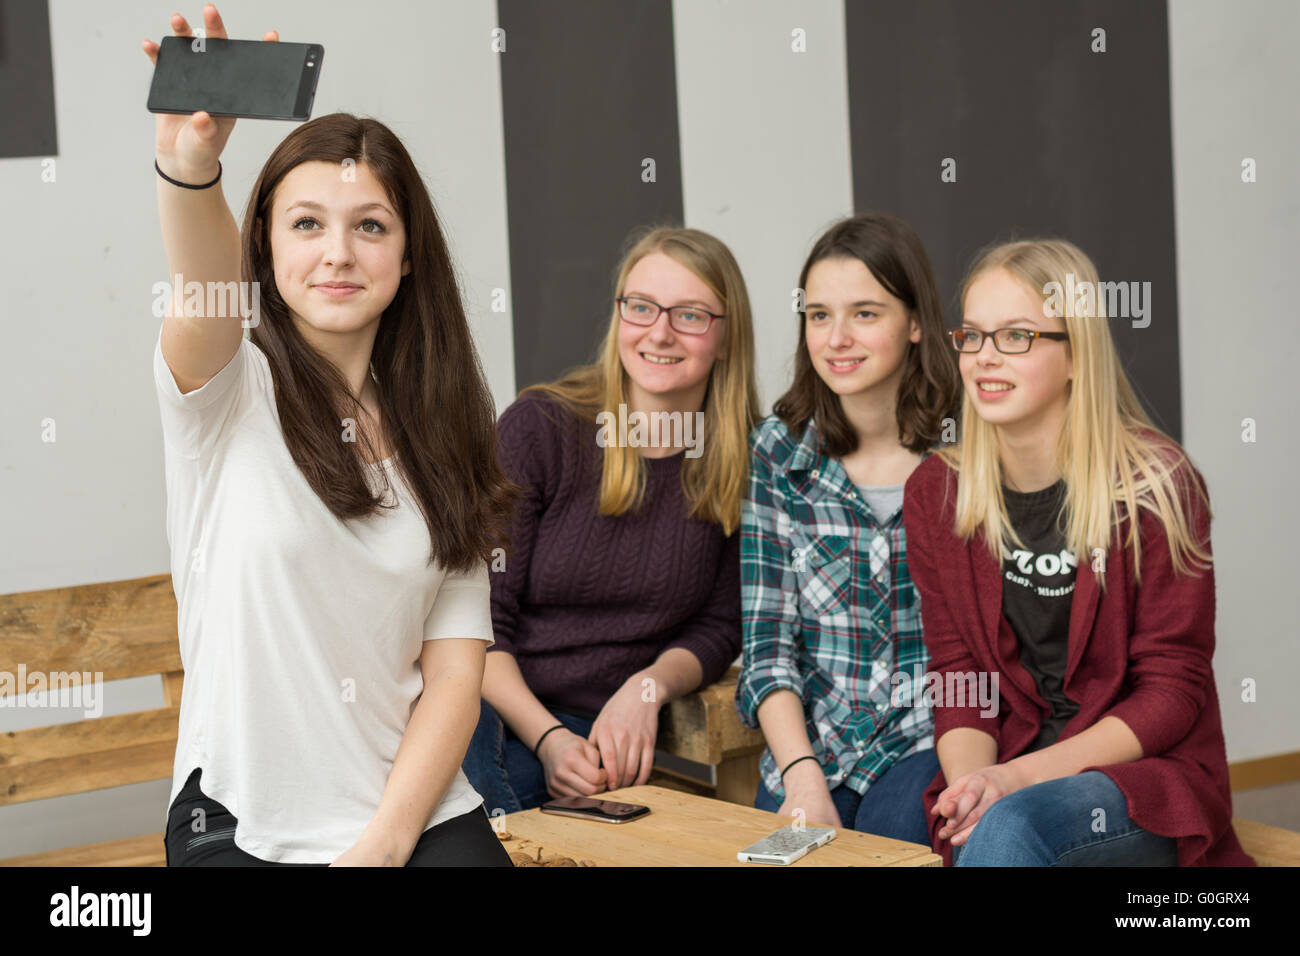 Teenager group with four girls making with a Smartphone Selfie Stock Photo